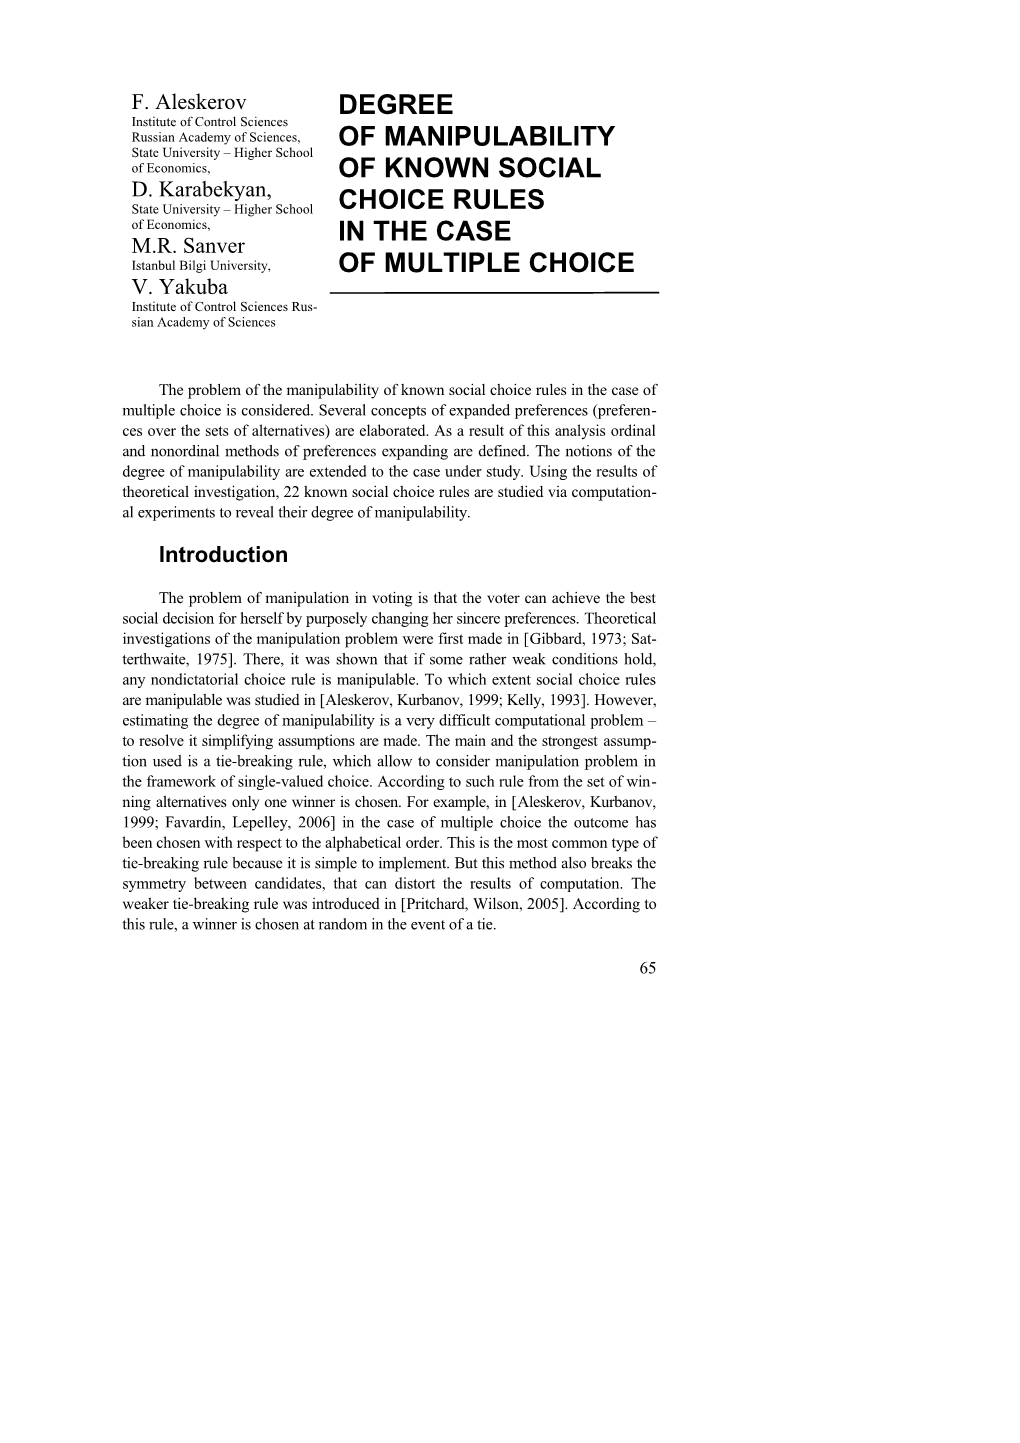 The Problem of the Manipulability of Known Social Choice Rules in the Case of Multiple